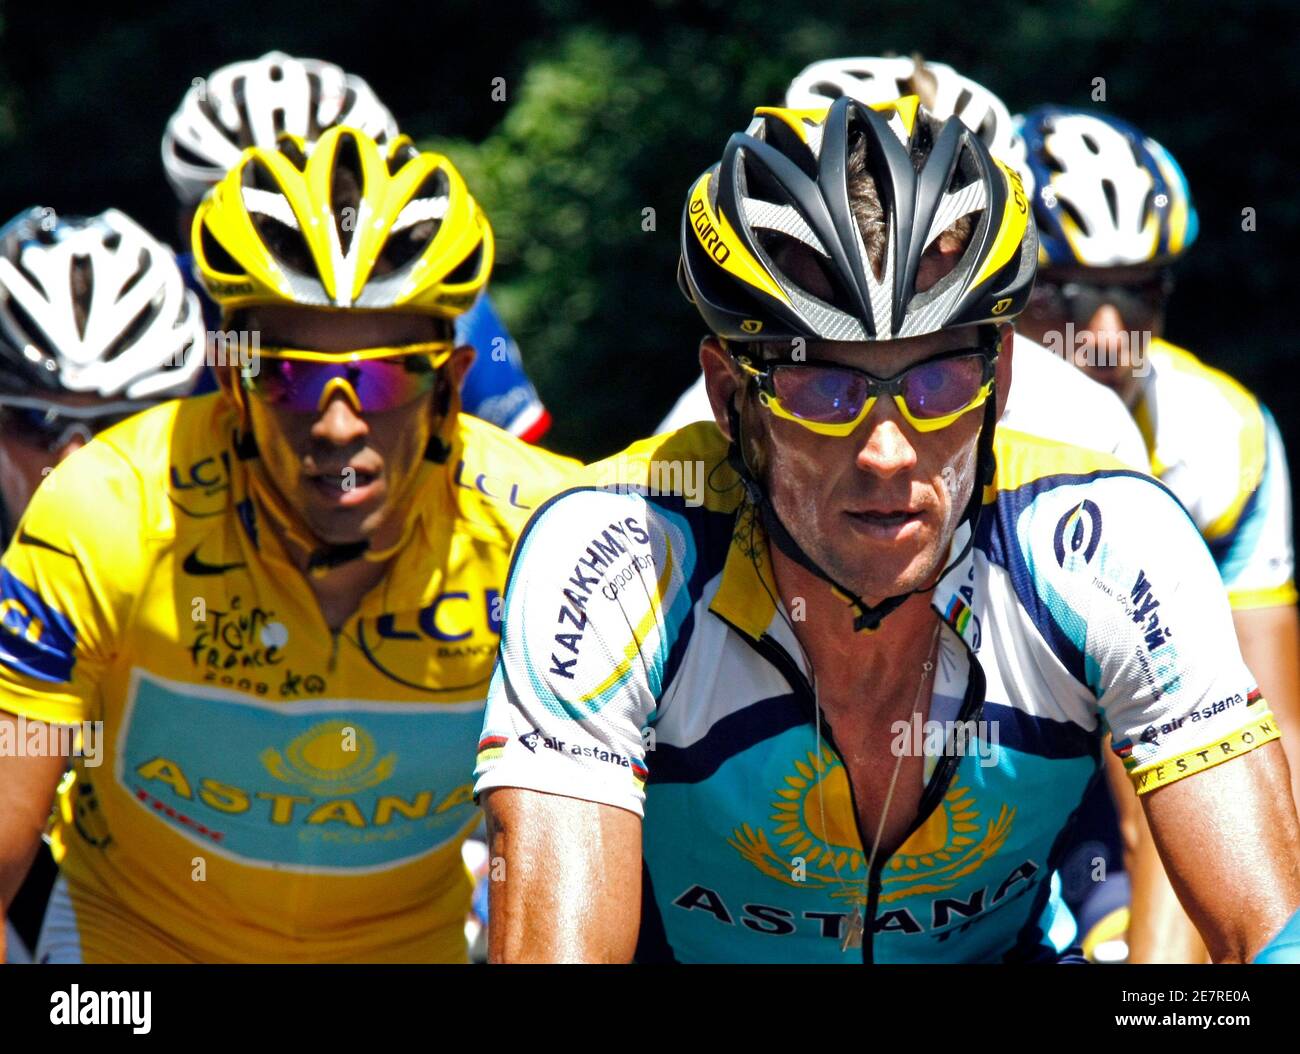 Astana rider and leader's yellow jersey holder Alberto Contador of Spain  (L) cycles with team mate Lance Armstrong of the U.S. (R) during the 19th  stage of the 96th Tour de France